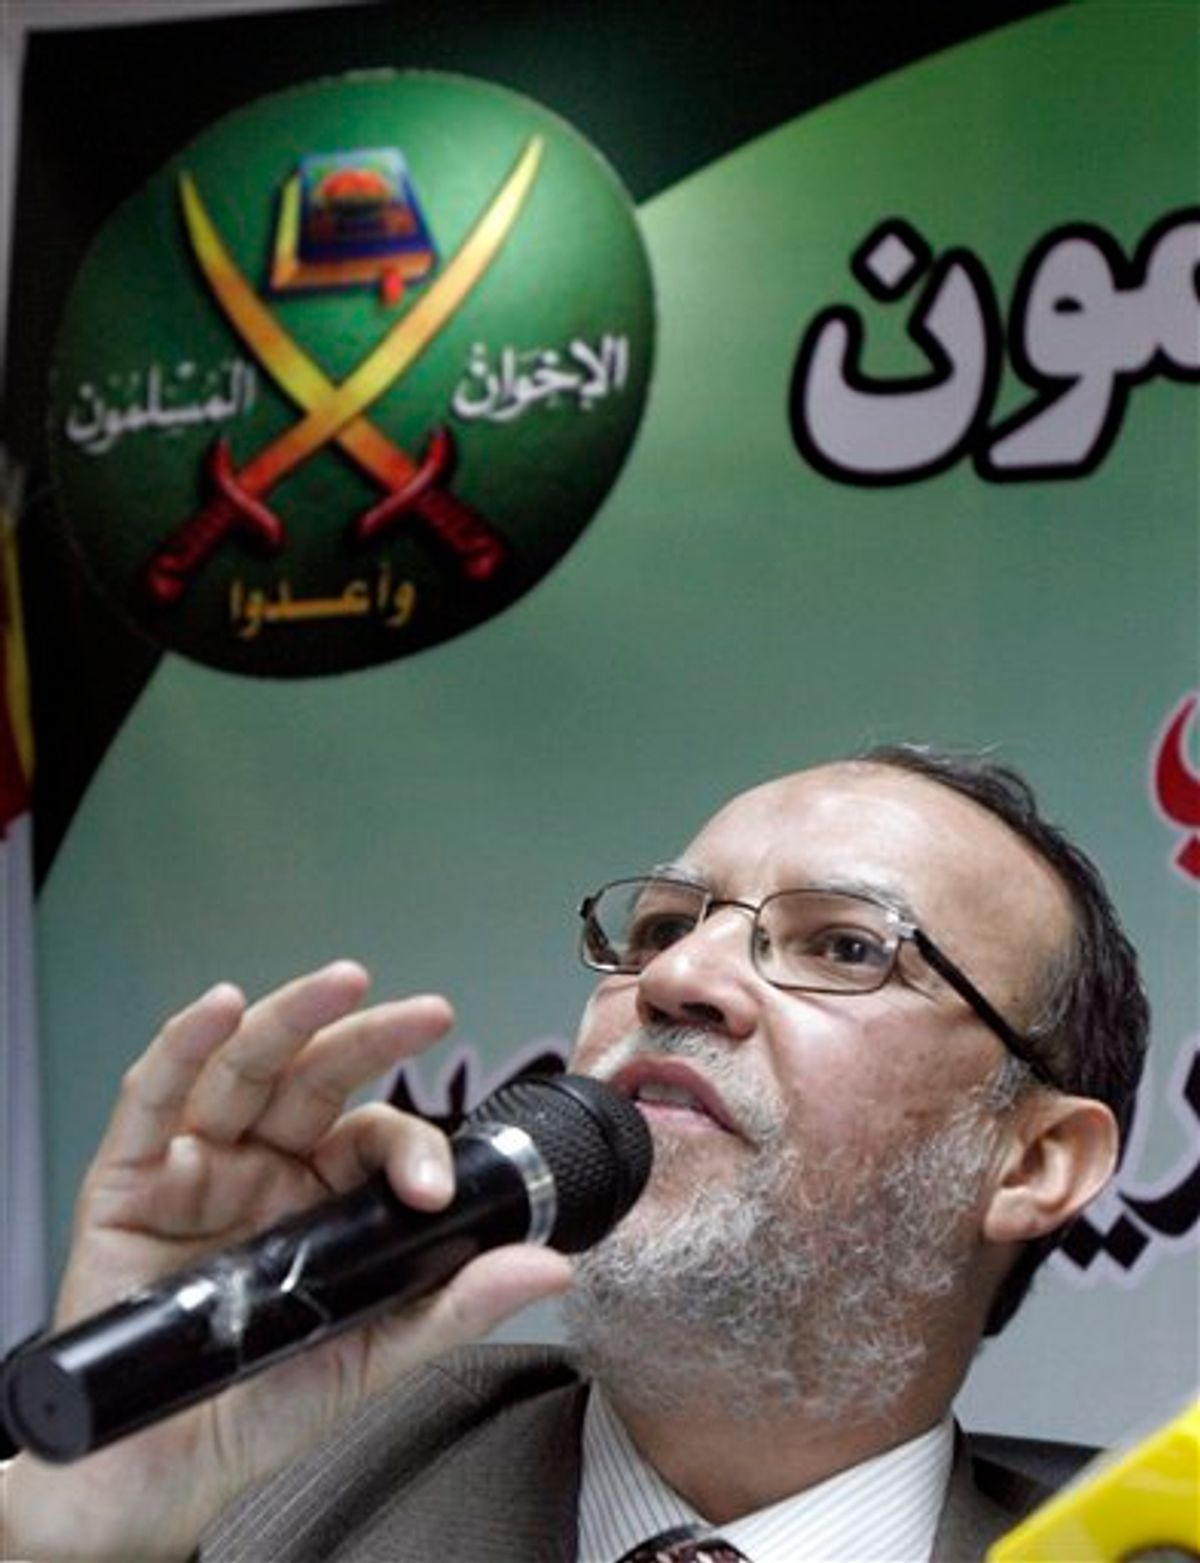 Senior member of Egypt's Muslim Brotherhood  Essam el-Erian talks during a press conference in Cairo, Egypt, Wednesday, Feb. 9, 2011. At top left is the Muslim Brotherhood logo.  (AP Photo/ Mohammed Abou Zaid) (AP)